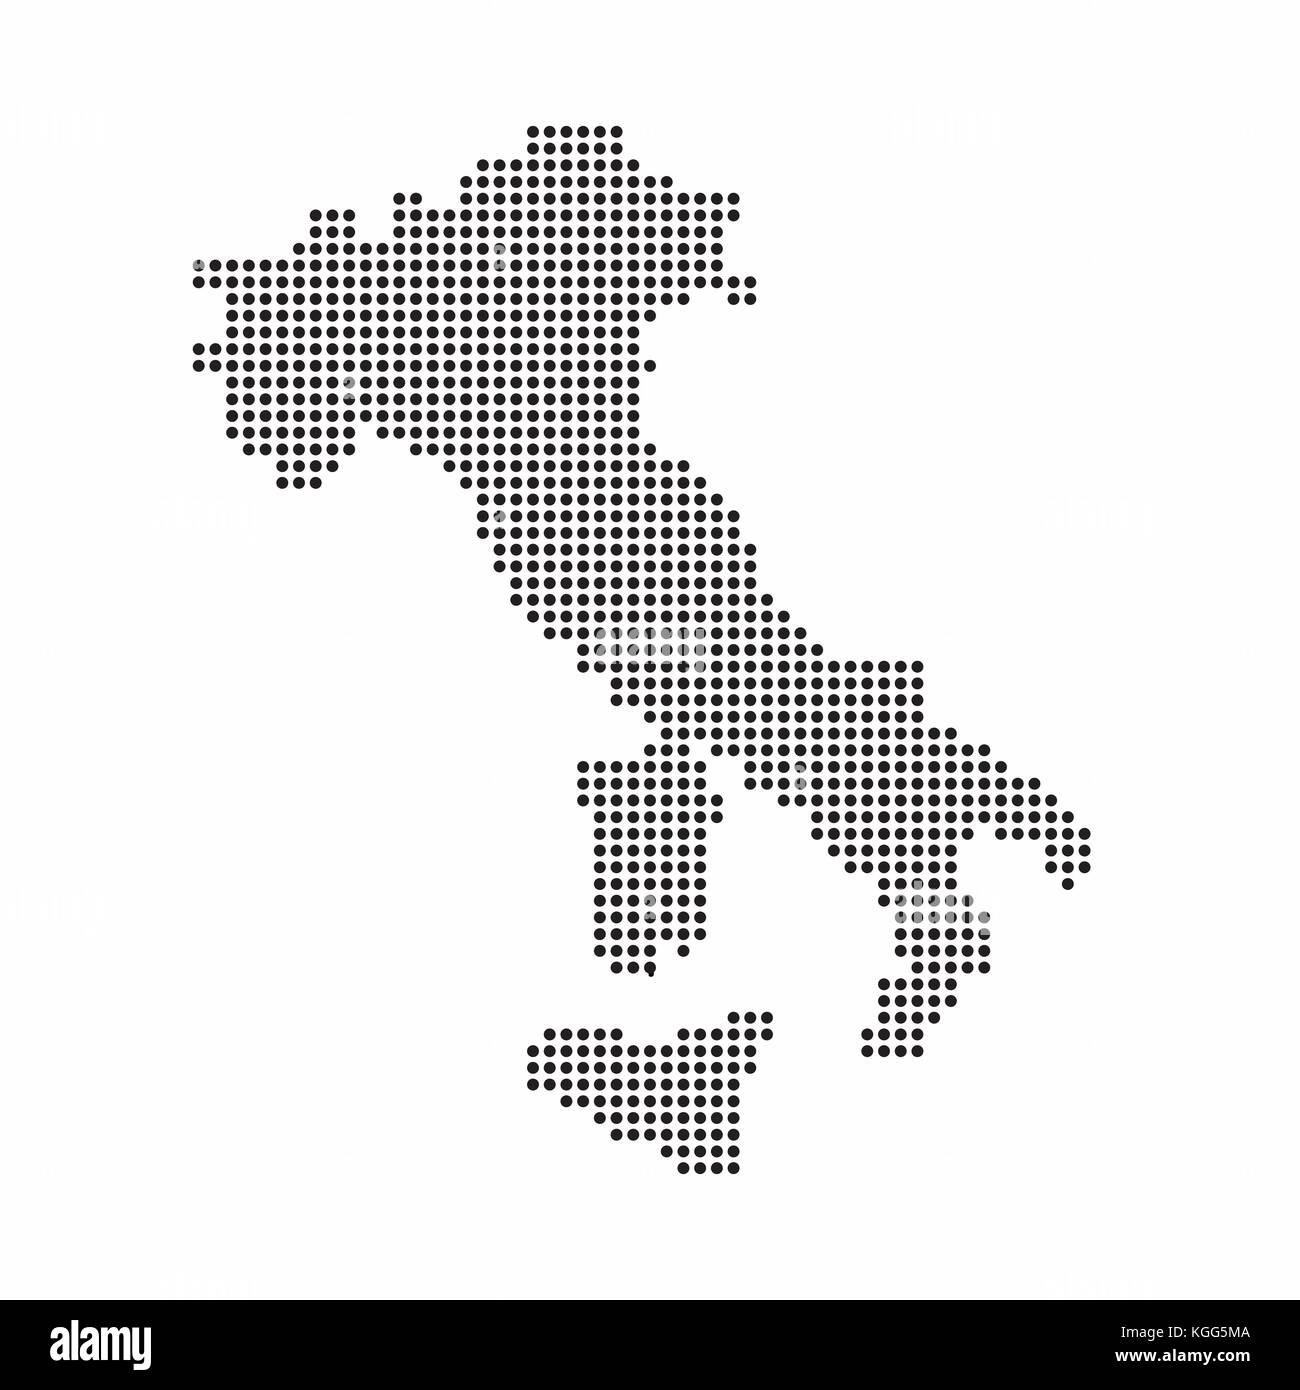 Italy country map made from abstract halftone dot pattern Stock Vector